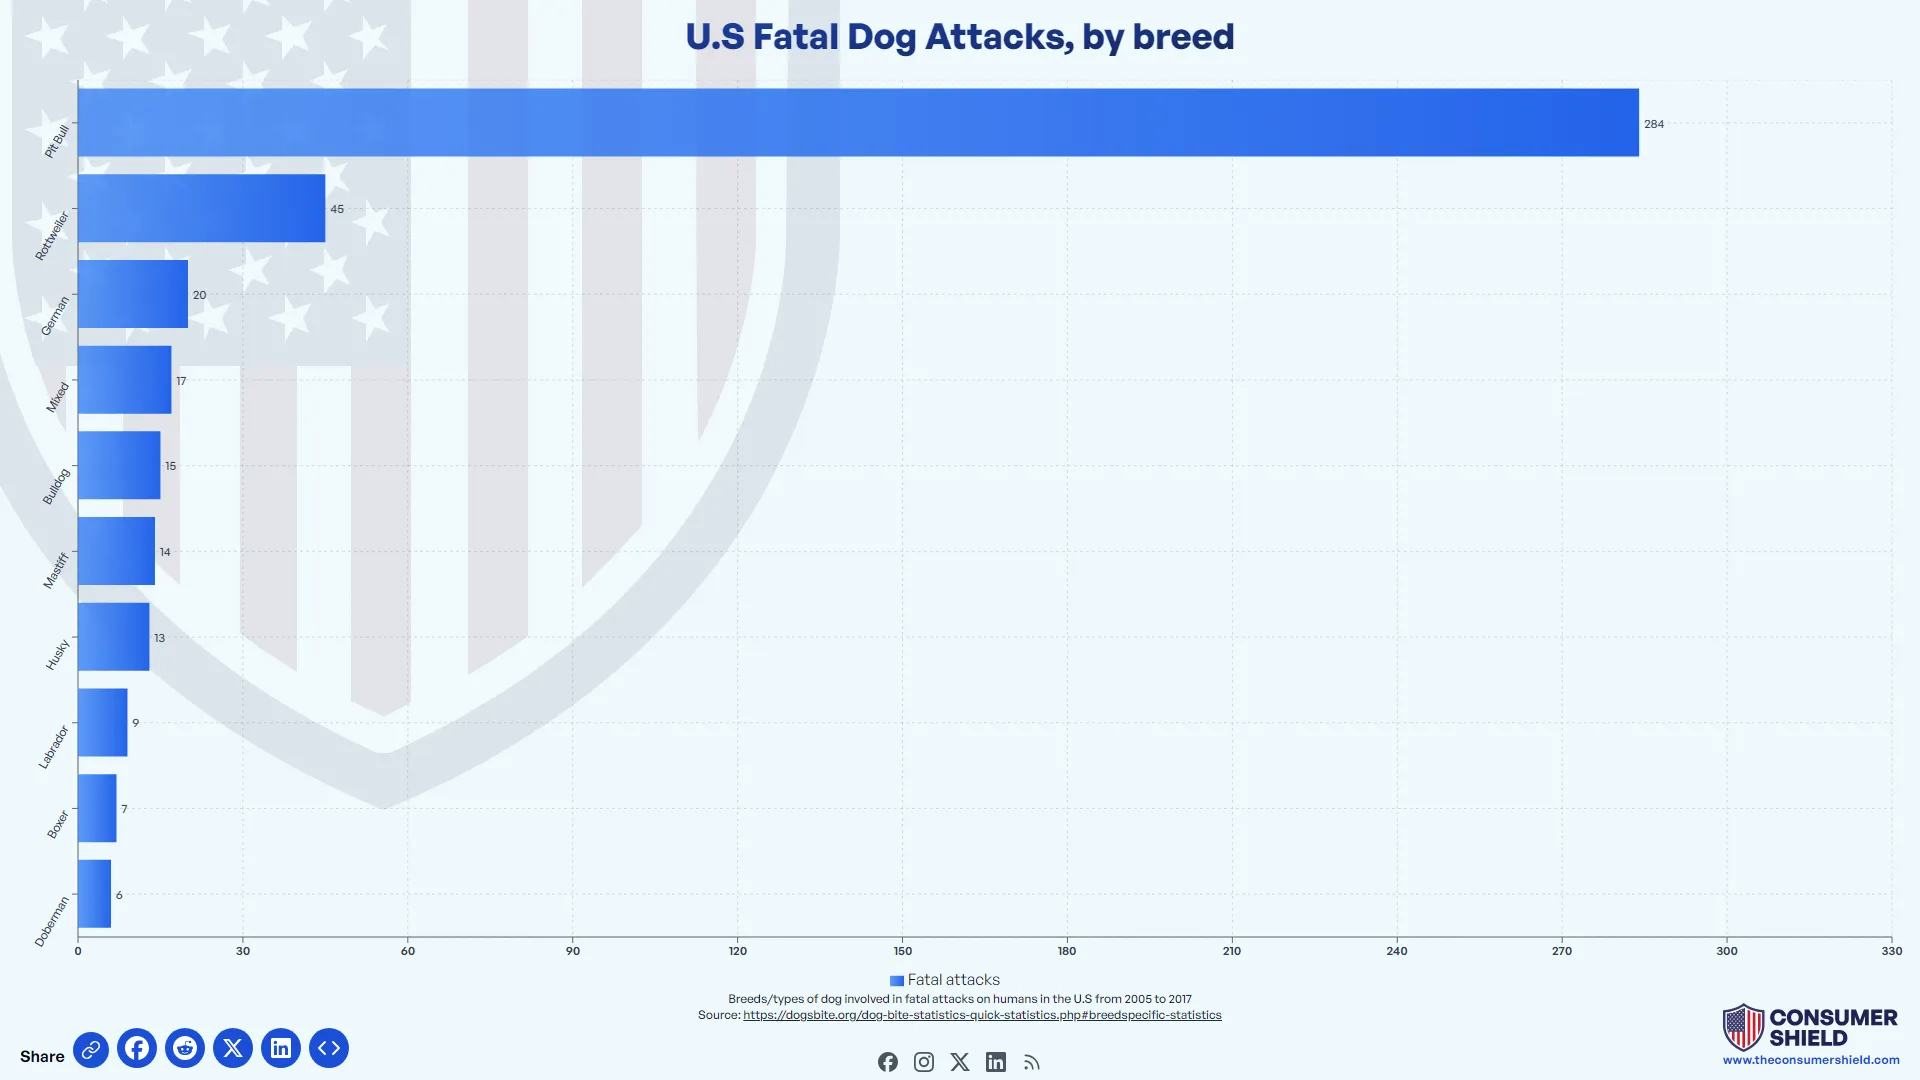 Dog Attack Statistics by Breed